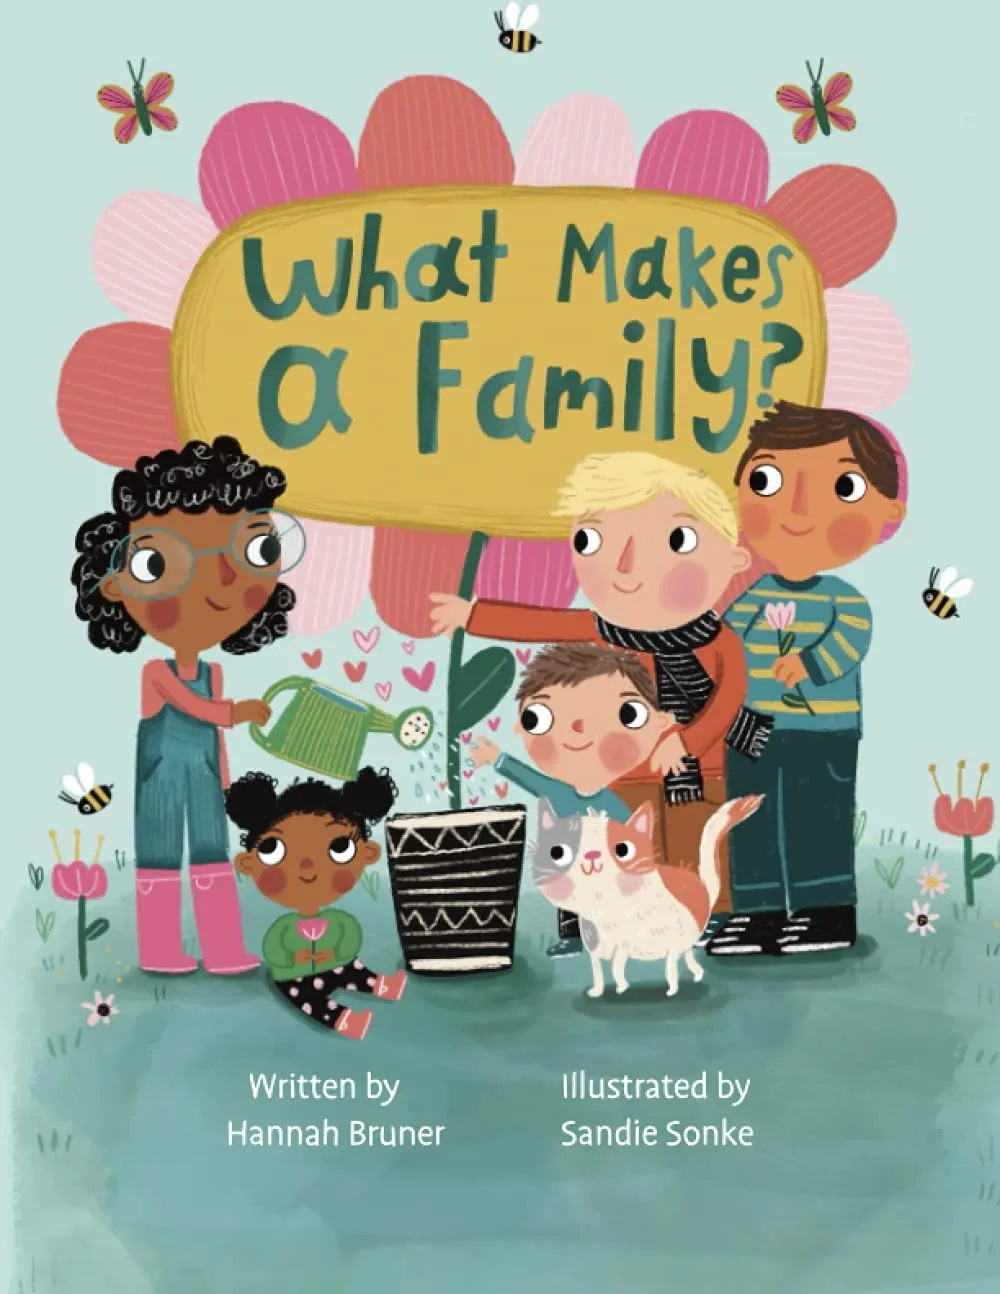 Book cover for "What Makes a Family," written by Hannah Bruner. The title is written in green text in the yellow center of a flower with petals of different shades of pink. A family of two waters the flower on its left side, while a family of four (including a pet cat) holds the flower on its right side.